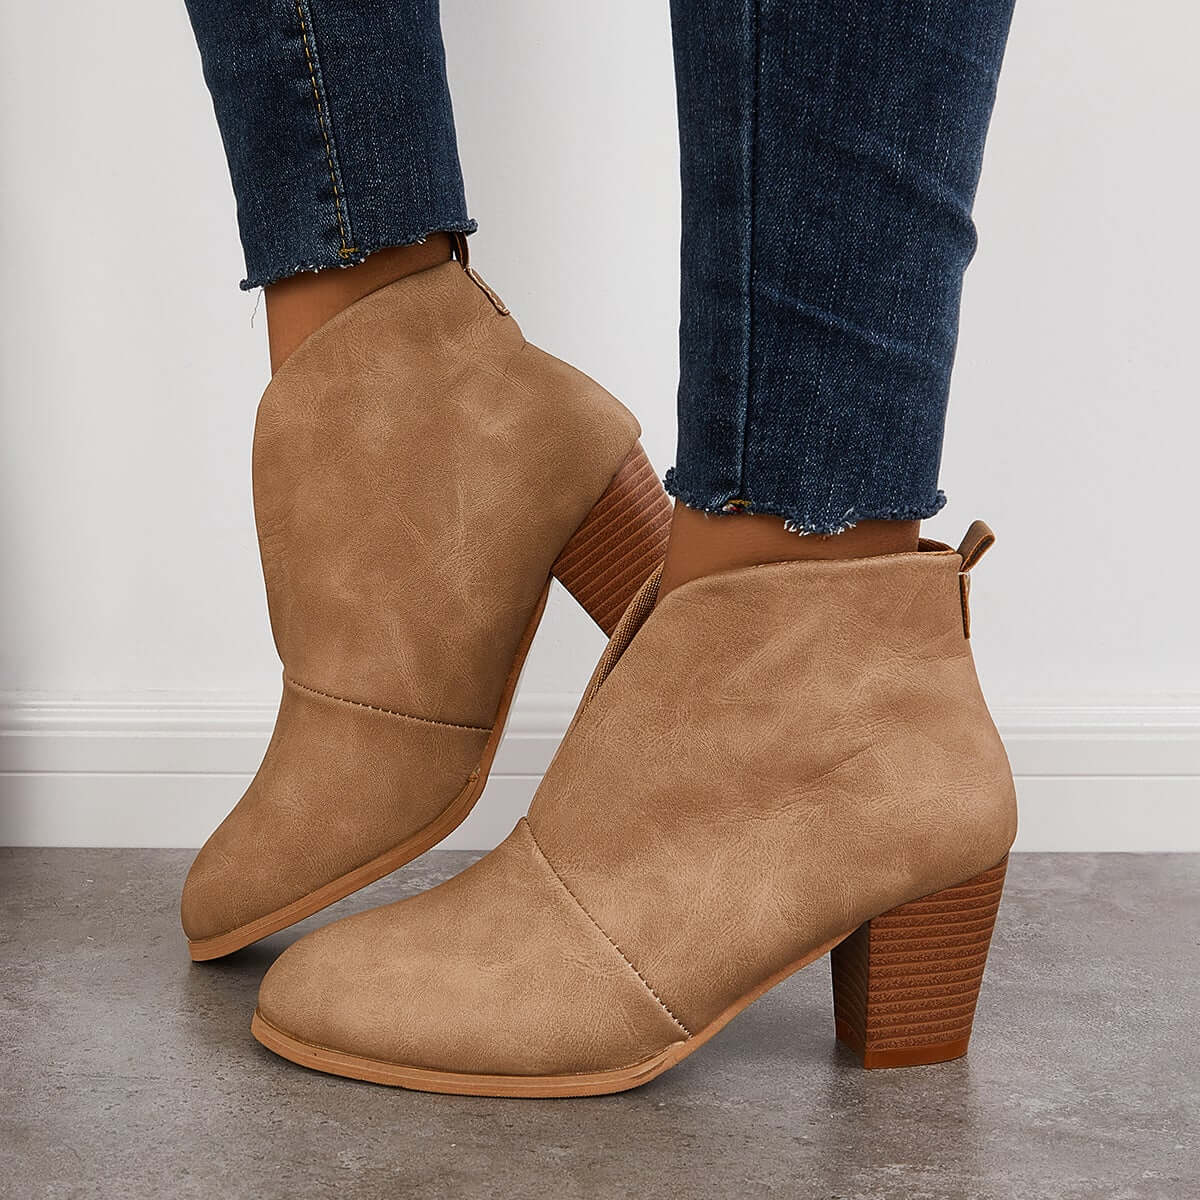 Shoemona Retro Western V Cut Ankle Boots Slip On Chunky Stacked Heel Booties